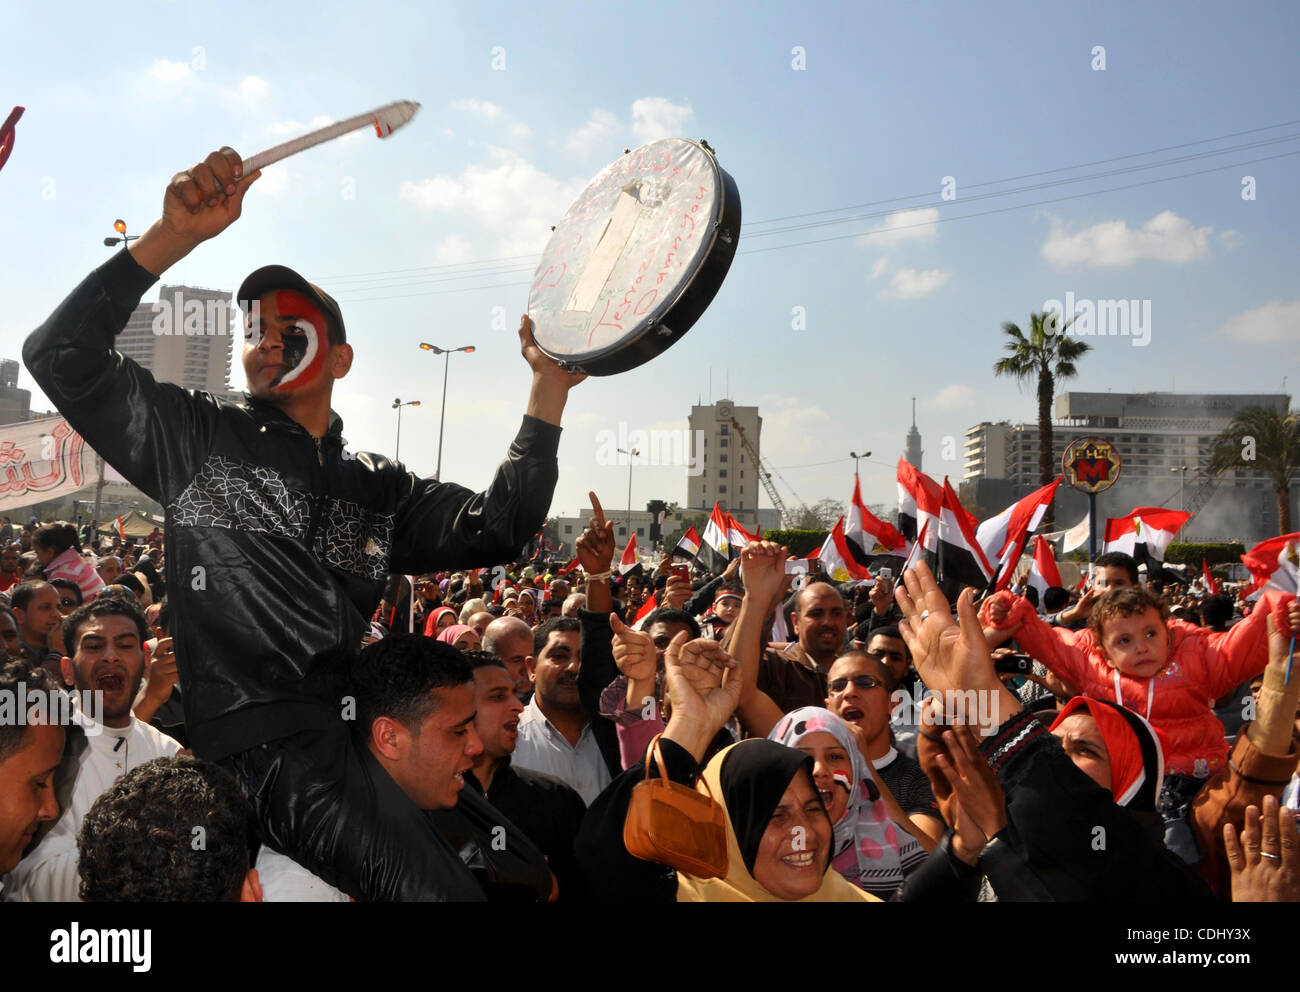 Egyptians celebrate and wave national flags in Tahrir Square in Cairo, Egypt, Saturday, Feb. 12, 2011. Egypt exploded with joy, tears, and relief after pro-democracy protesters brought down President Hosni Mubarak with a momentous march on his palaces and state TV. Mubarak, who until the end seemed  Stock Photo